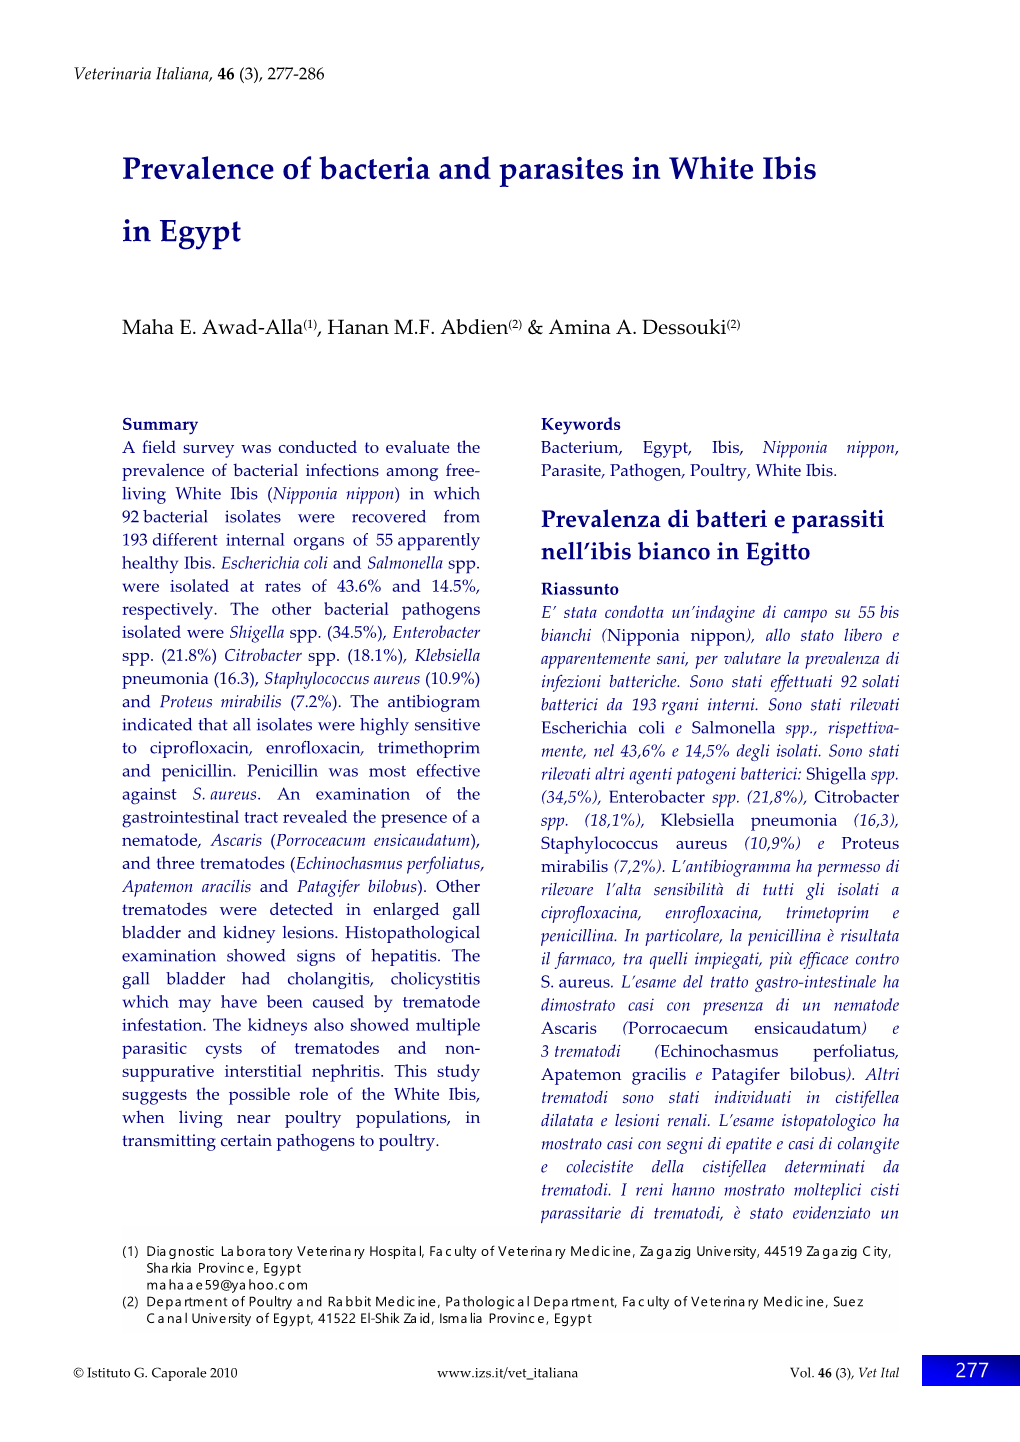 Prevalence of Bacteria and Parasites in White Ibis in Egypt Maha E